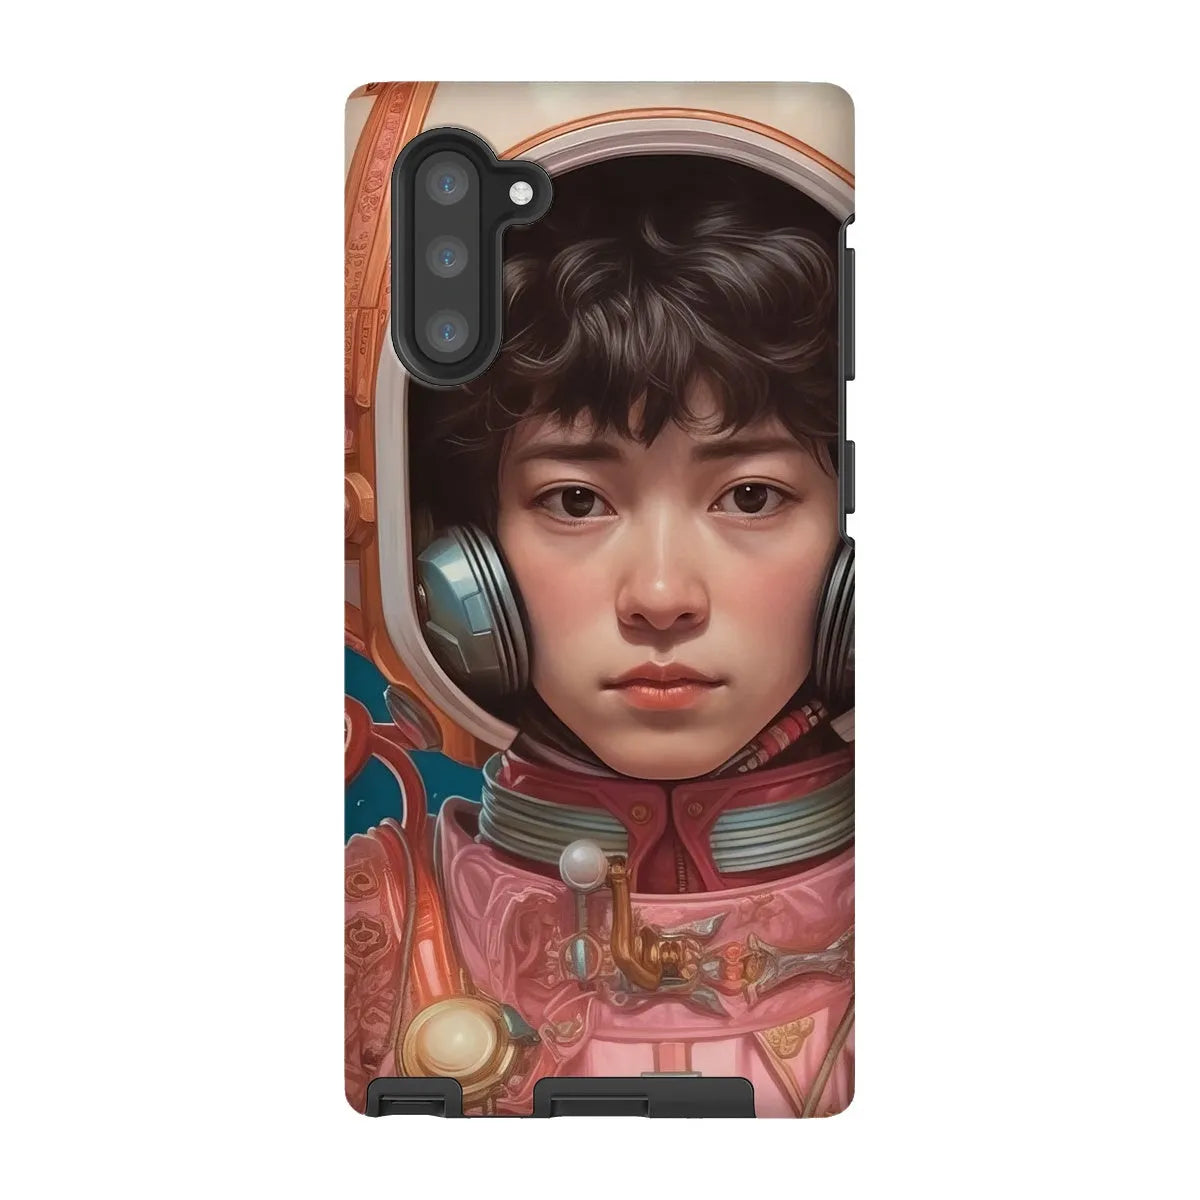 Kaito The Gay Astronaut - Lgbtq Art Phone Case - Samsung Galaxy Note 10 / Matte - Mobile Phone Cases - Aesthetic Art